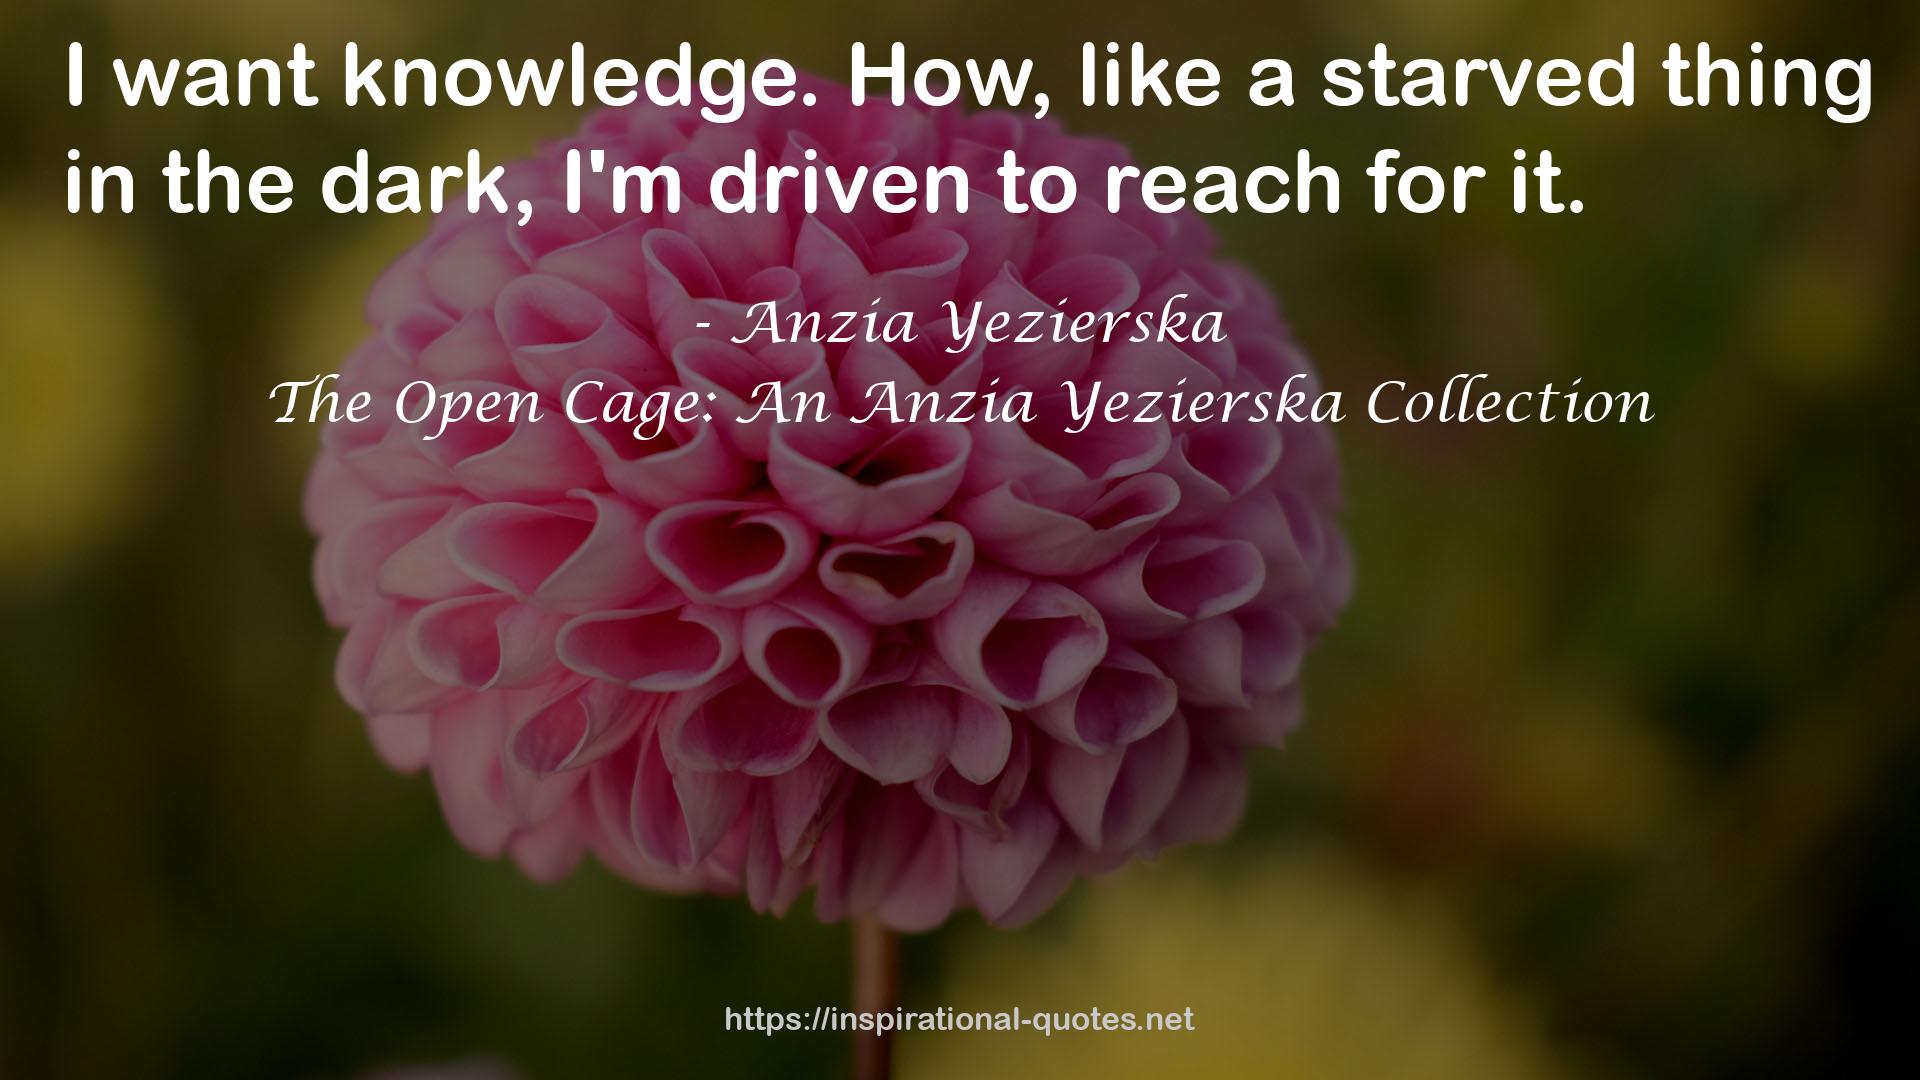 The Open Cage: An Anzia Yezierska Collection QUOTES